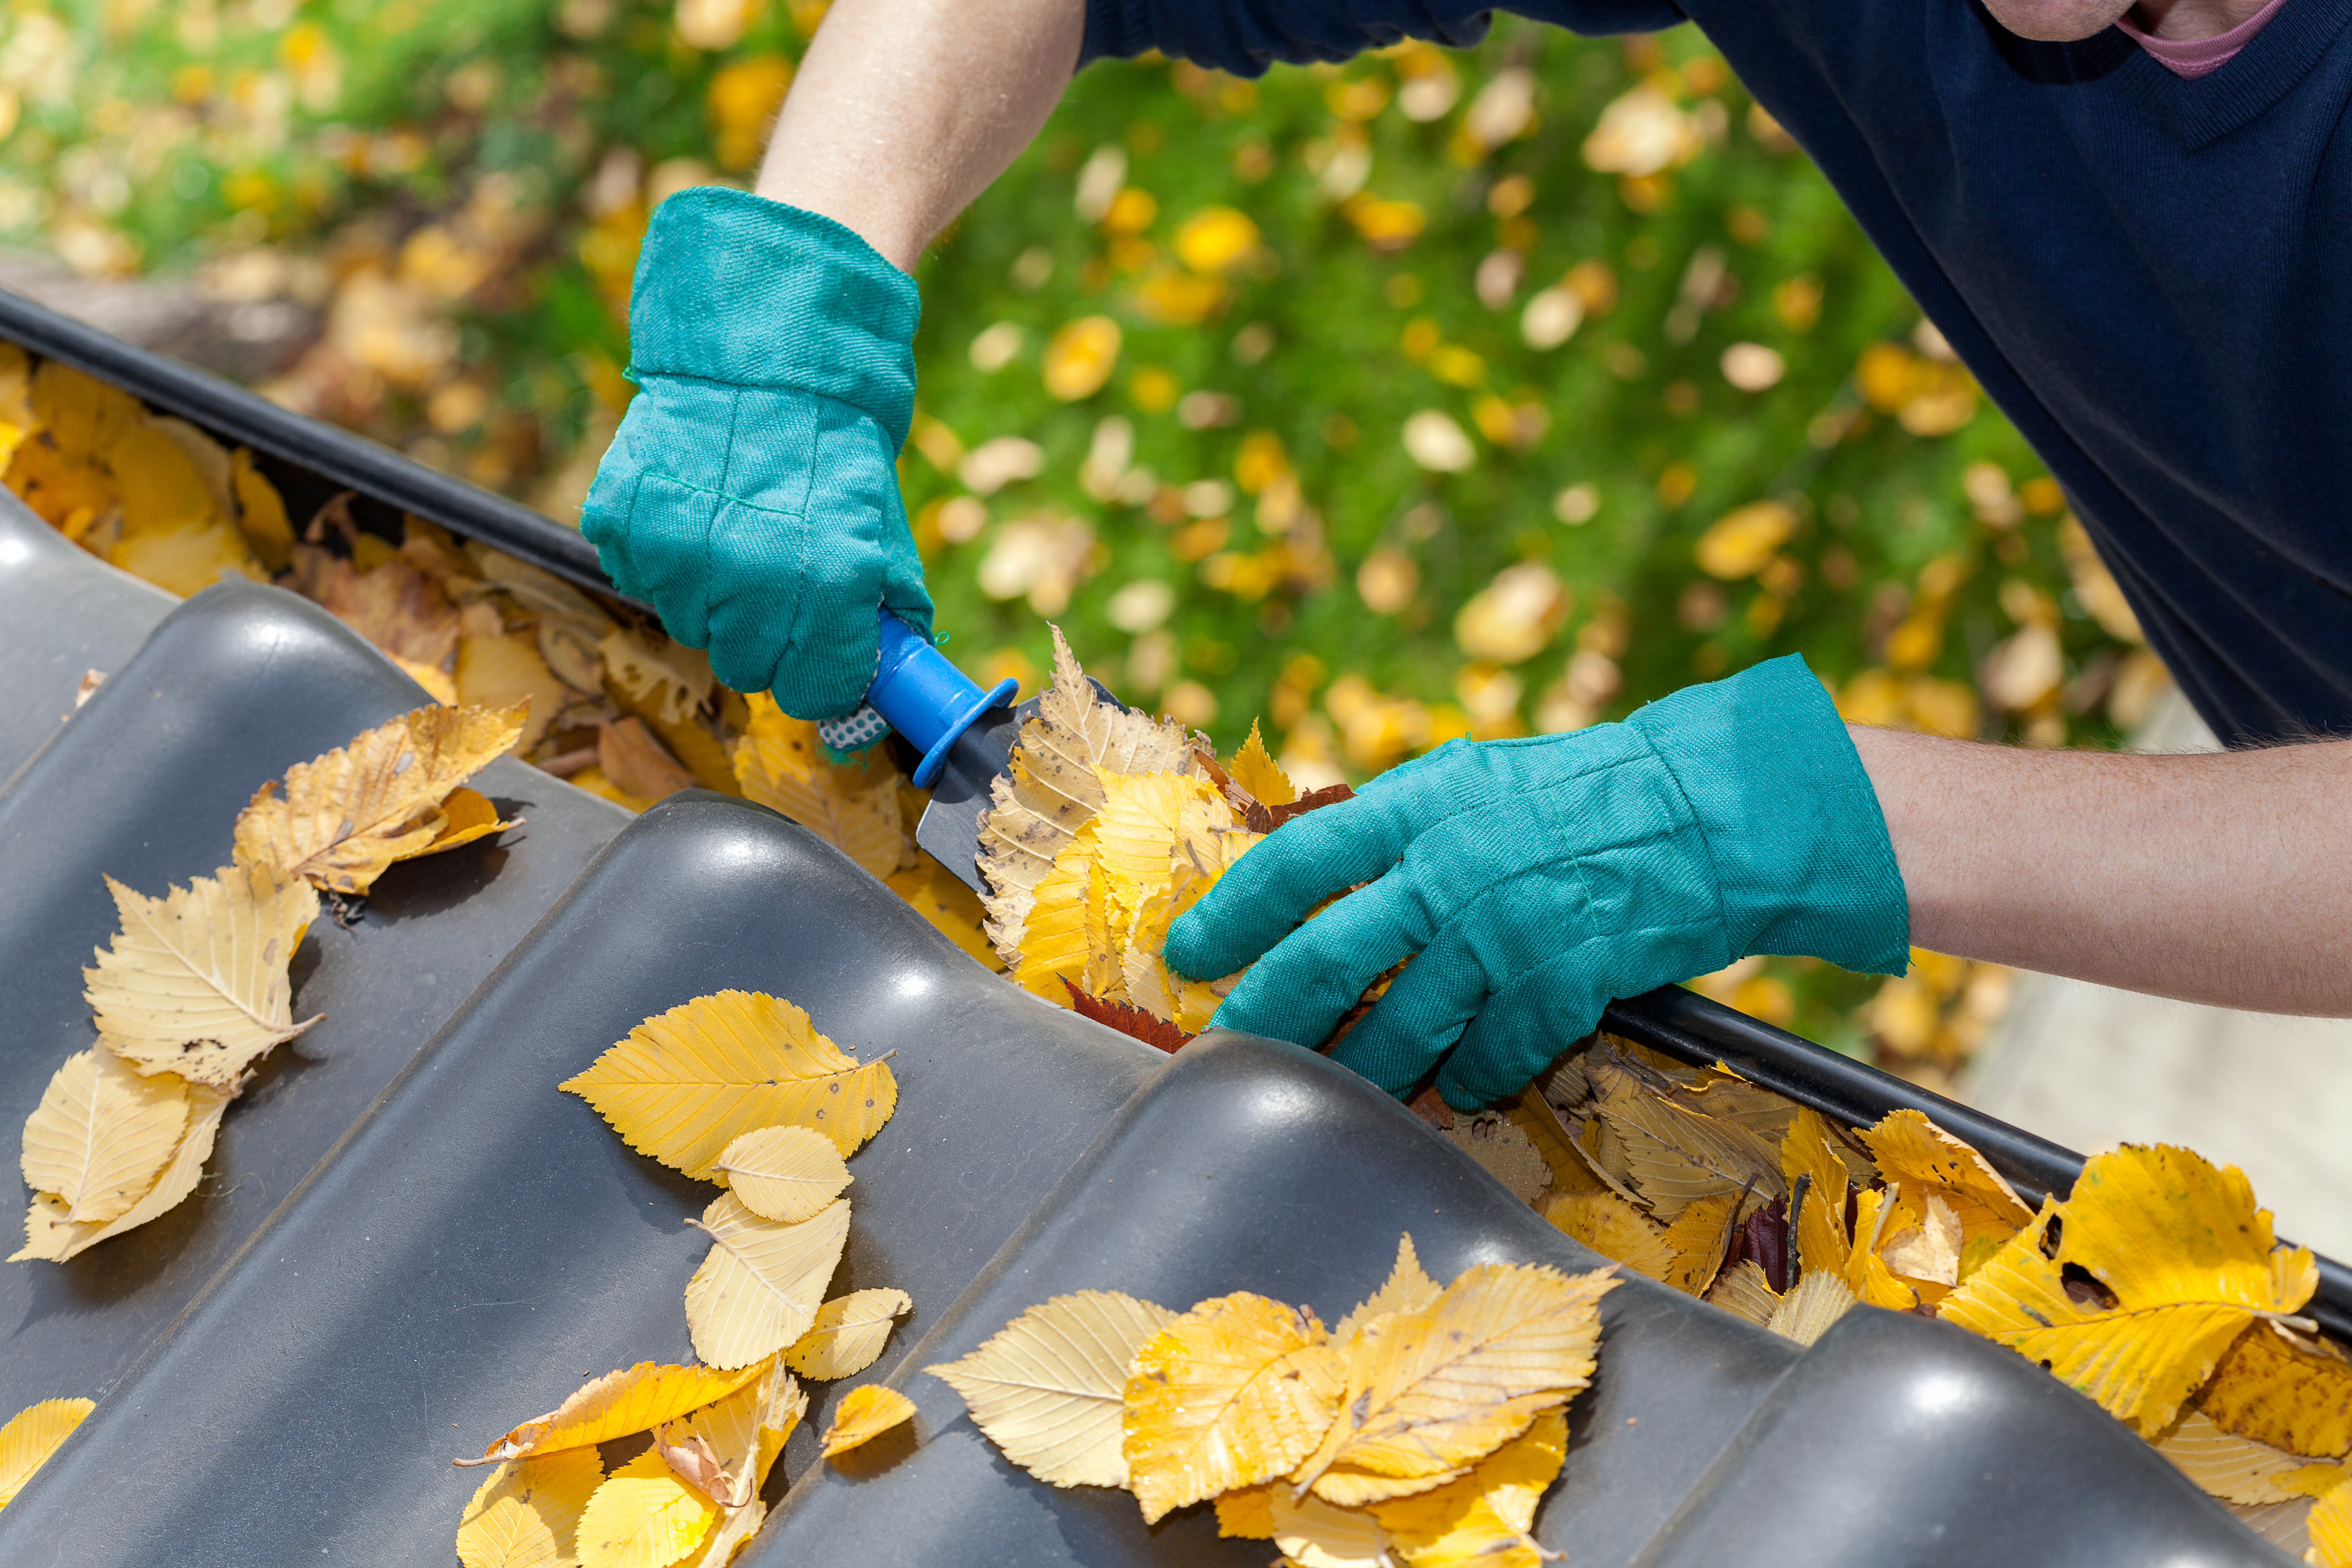 Autumn Safety Tips: Protect What Matters